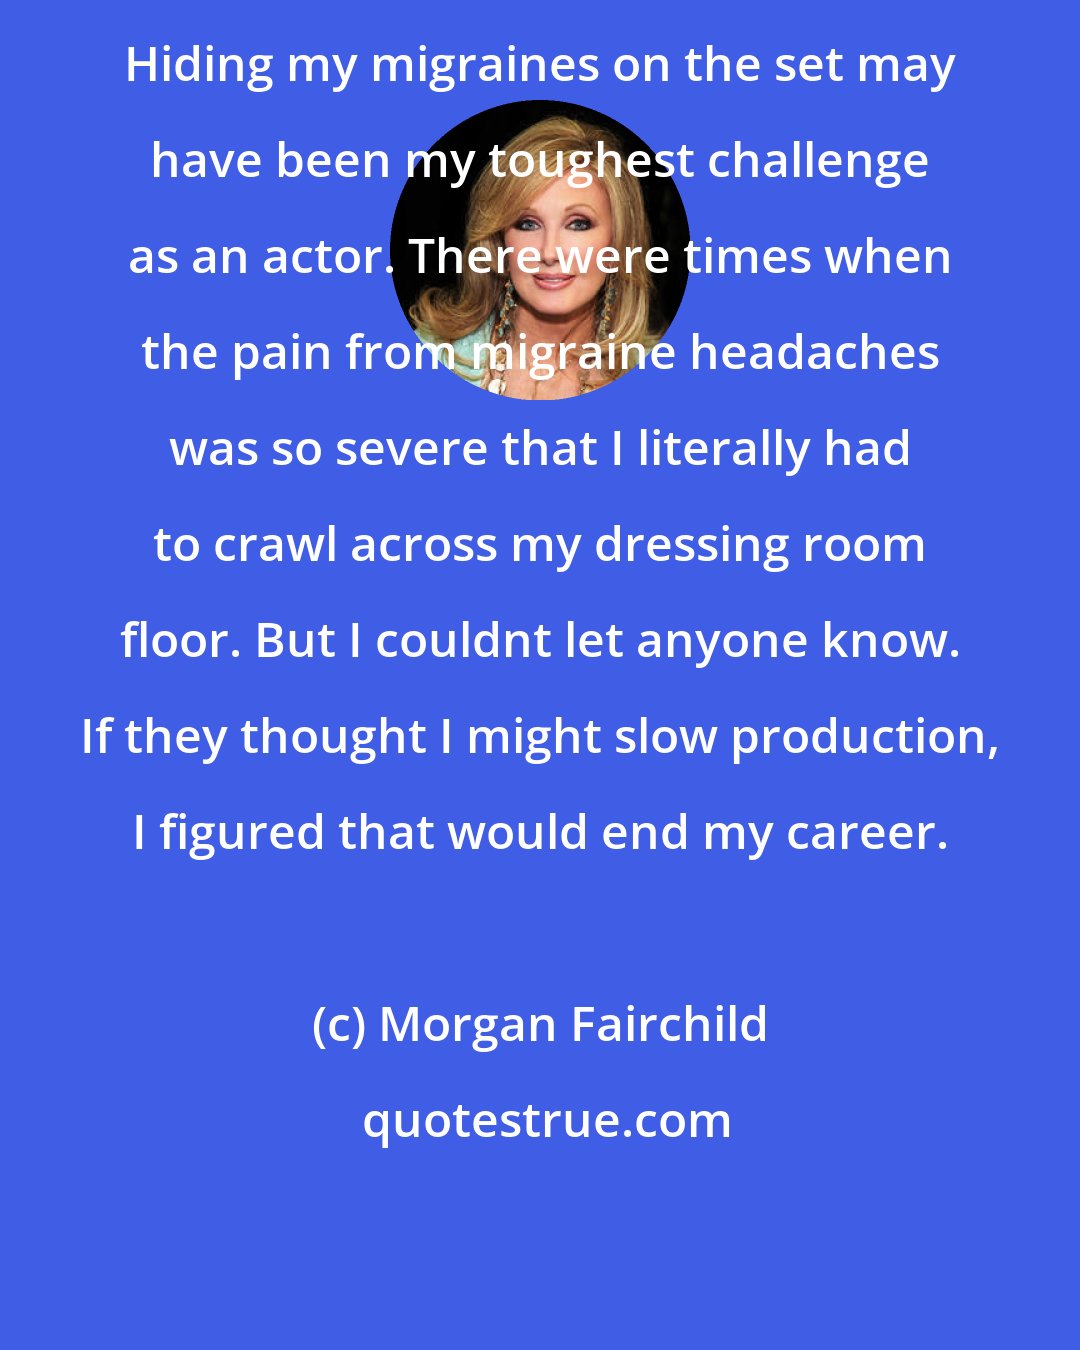 Morgan Fairchild: Hiding my migraines on the set may have been my toughest challenge as an actor. There were times when the pain from migraine headaches was so severe that I literally had to crawl across my dressing room floor. But I couldnt let anyone know. If they thought I might slow production, I figured that would end my career.